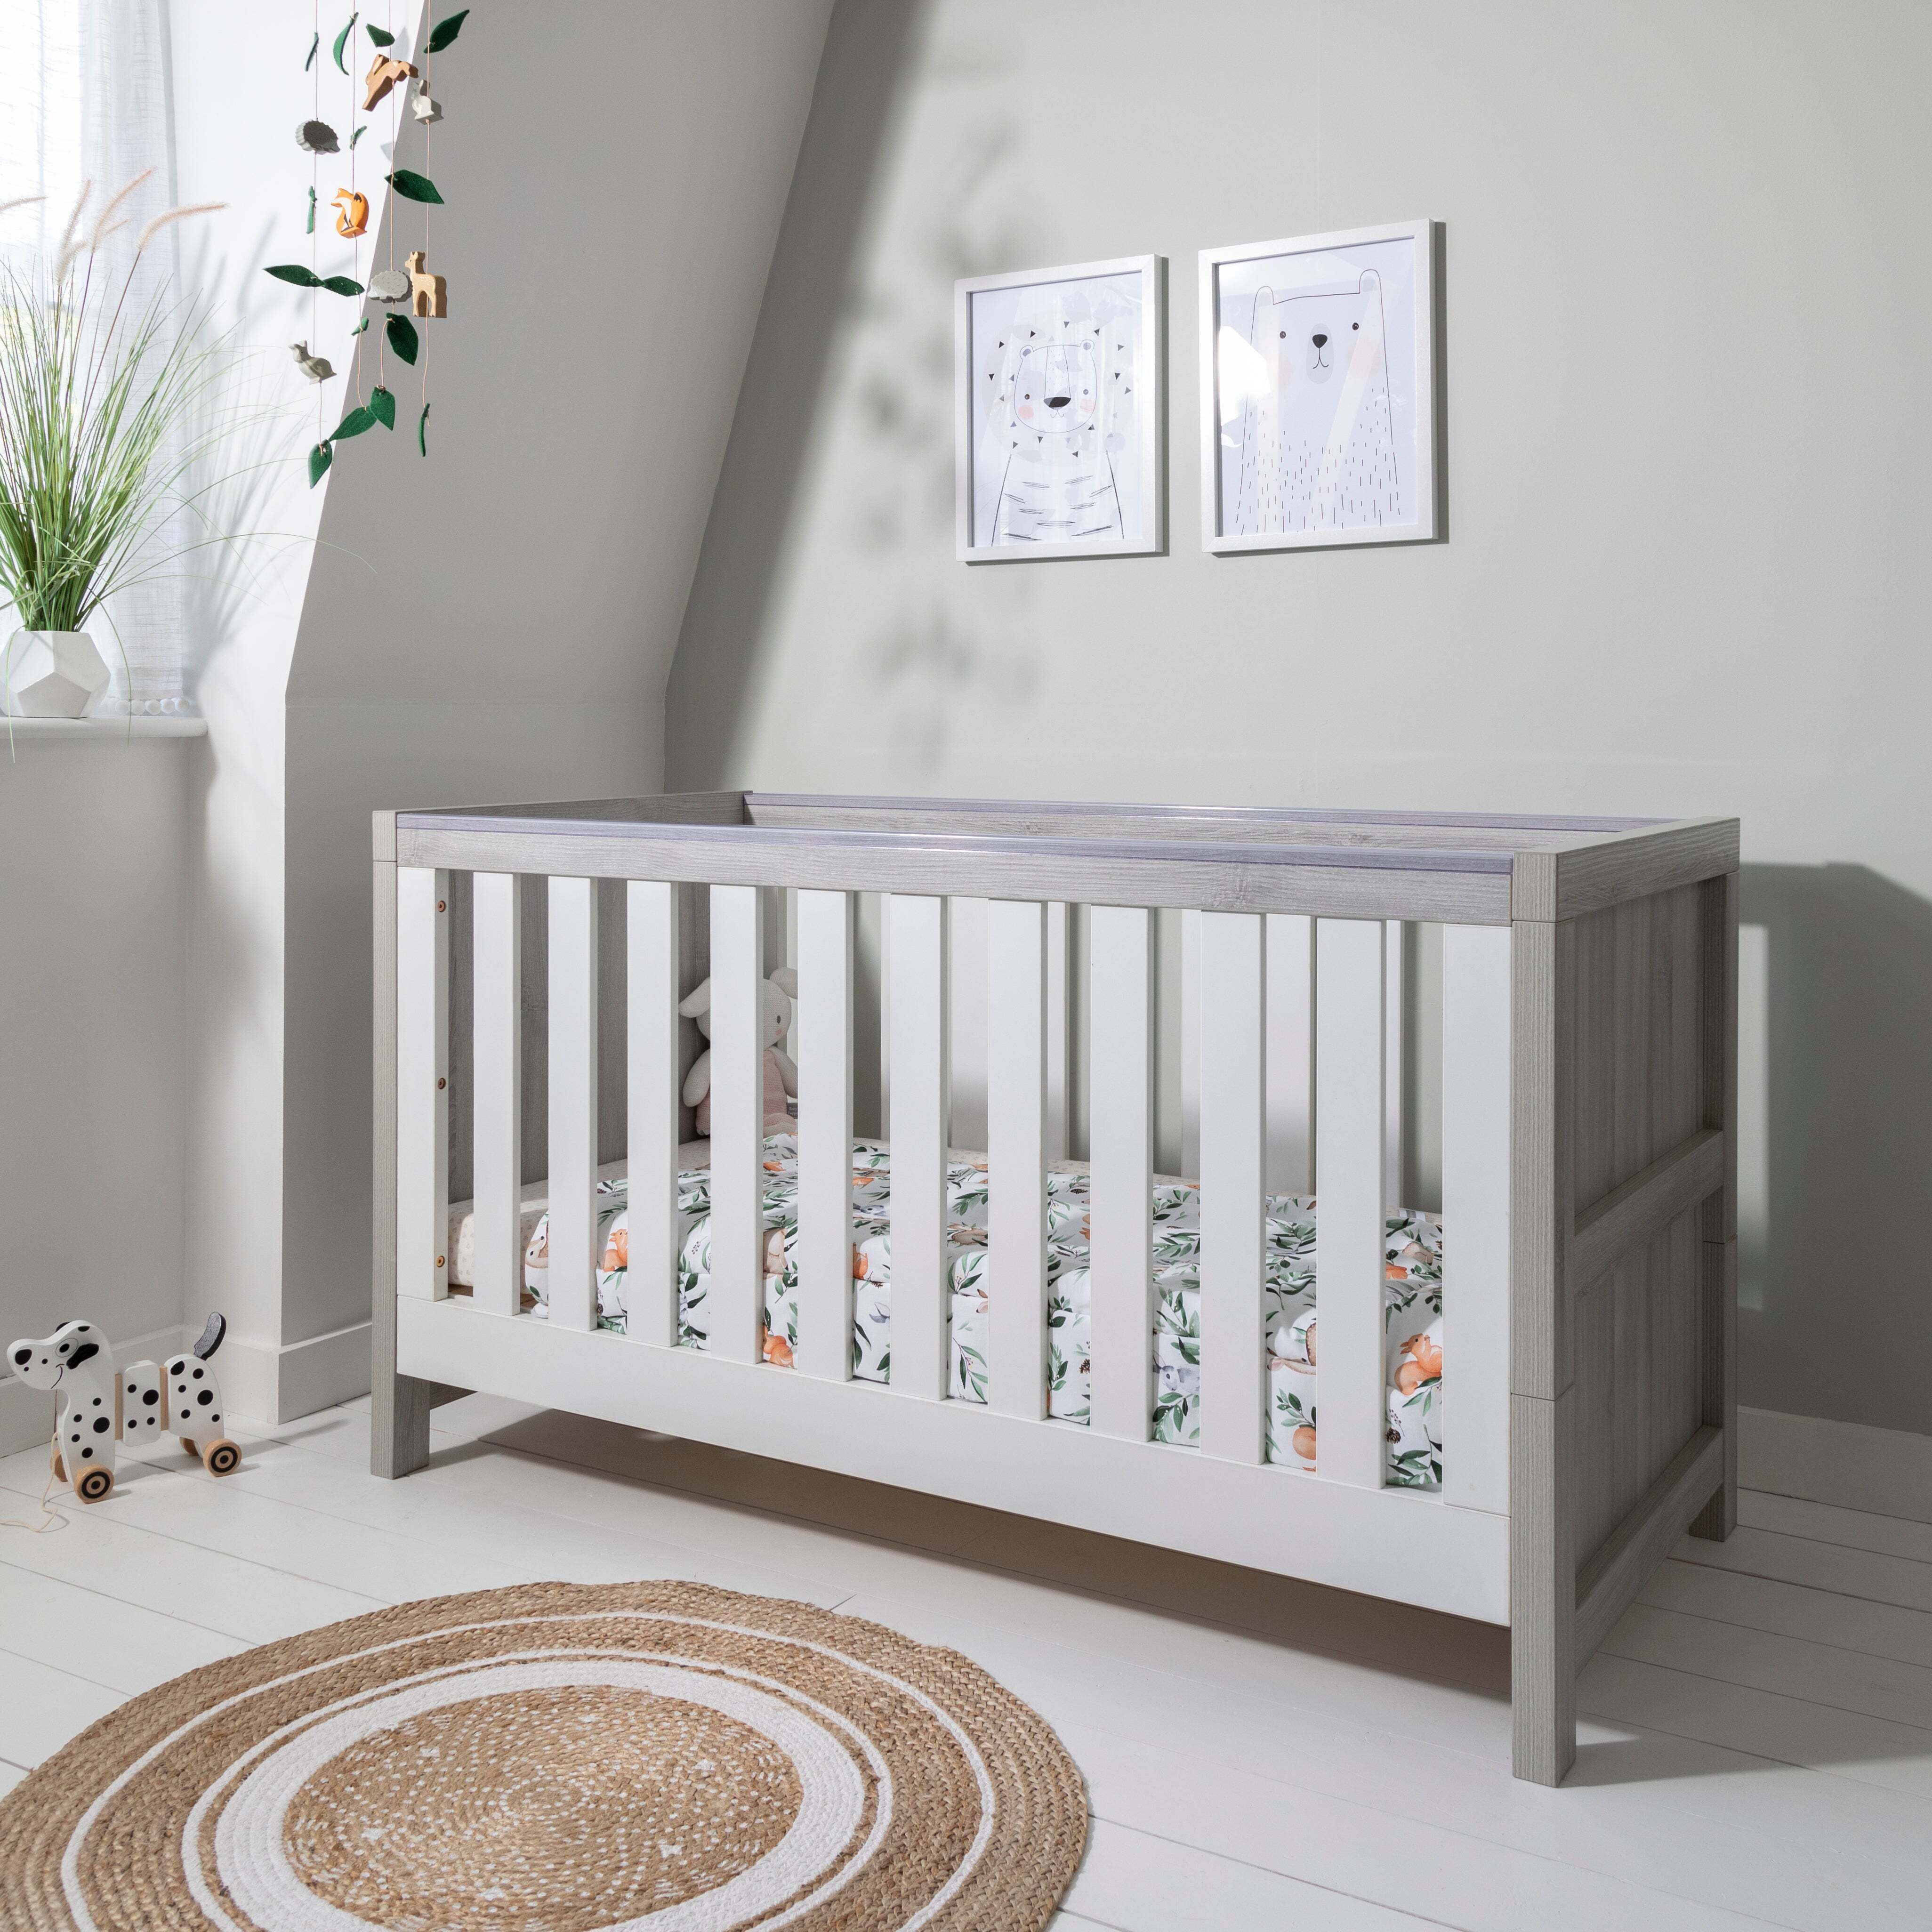 Modena 3 in 1 Cot bed Grey